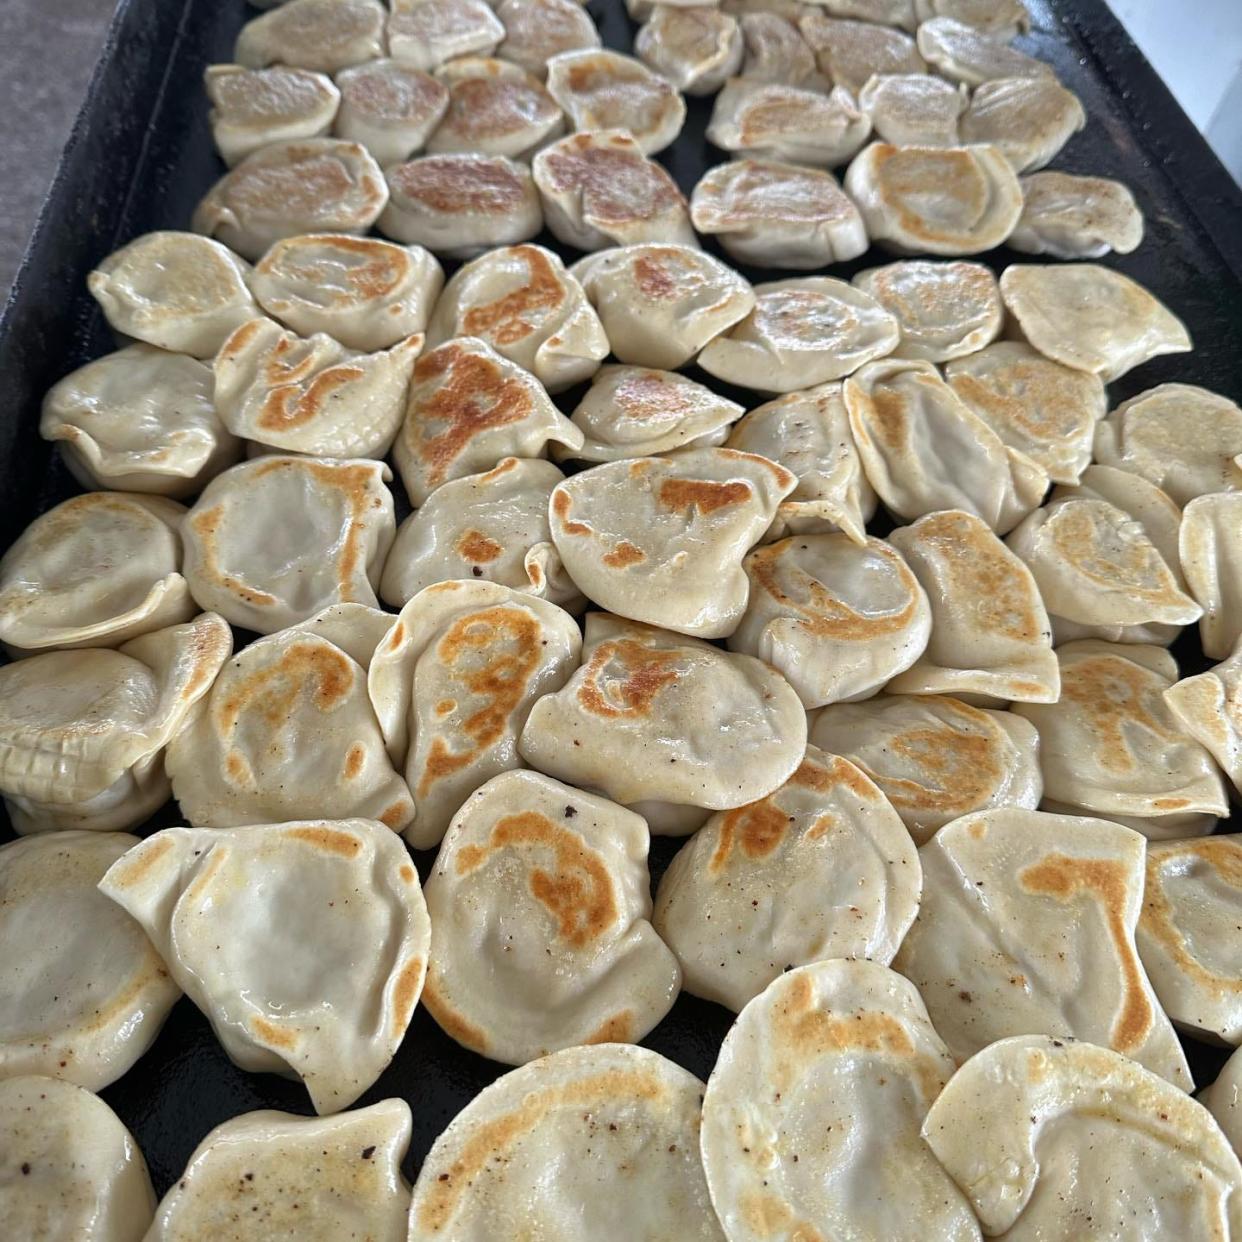 The Pierogi Lady is an Akron-based business that sells its pierogies at festivals, farmers markets and grocery stores in northeast Ohio.